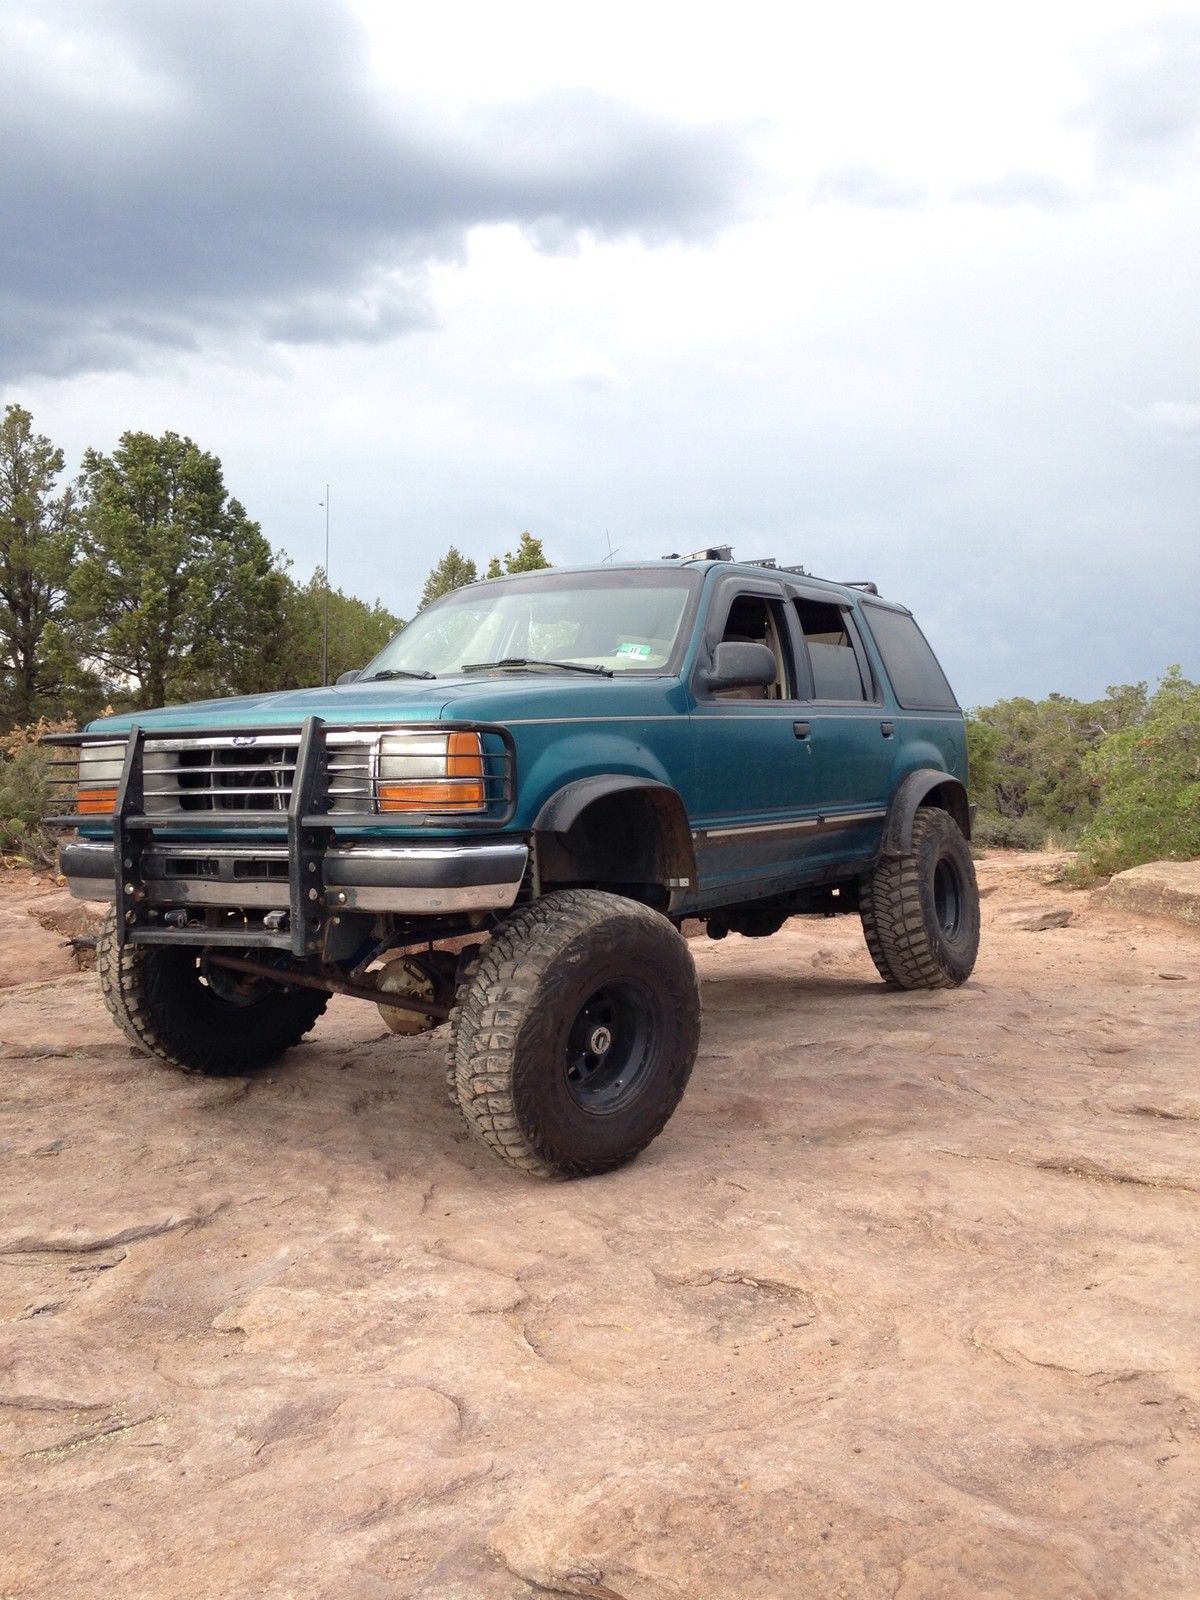 Custom Lifted 94' Ford Explorer Off Road Truck